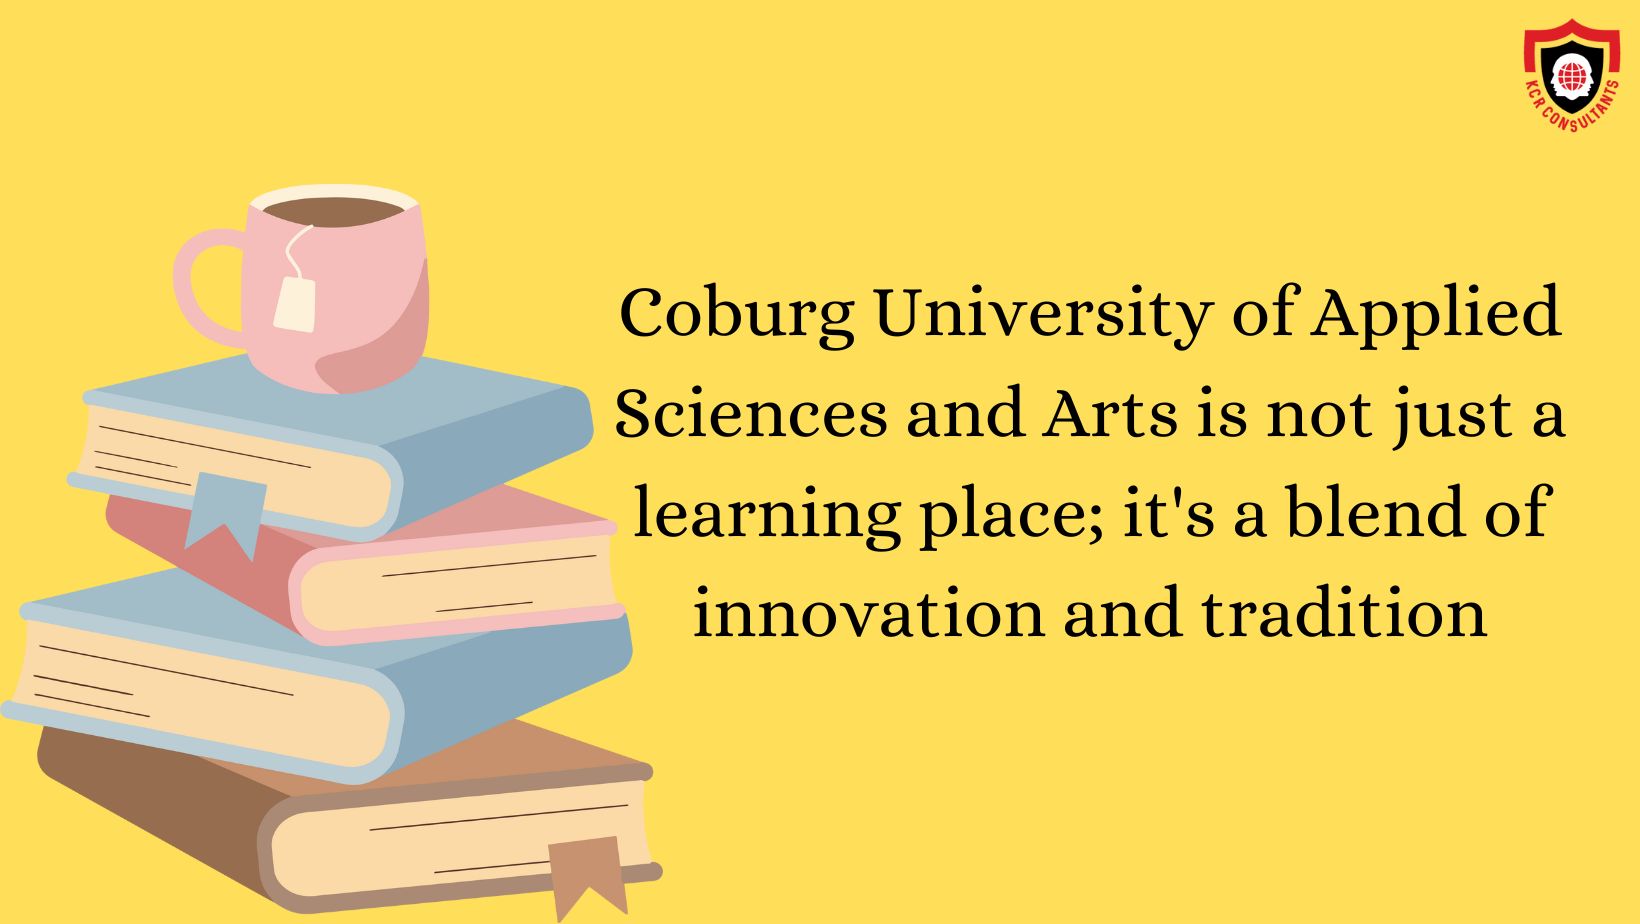 Coburg University of Applied Sciences and Arts - KCR CONSULTANTS - Introduction